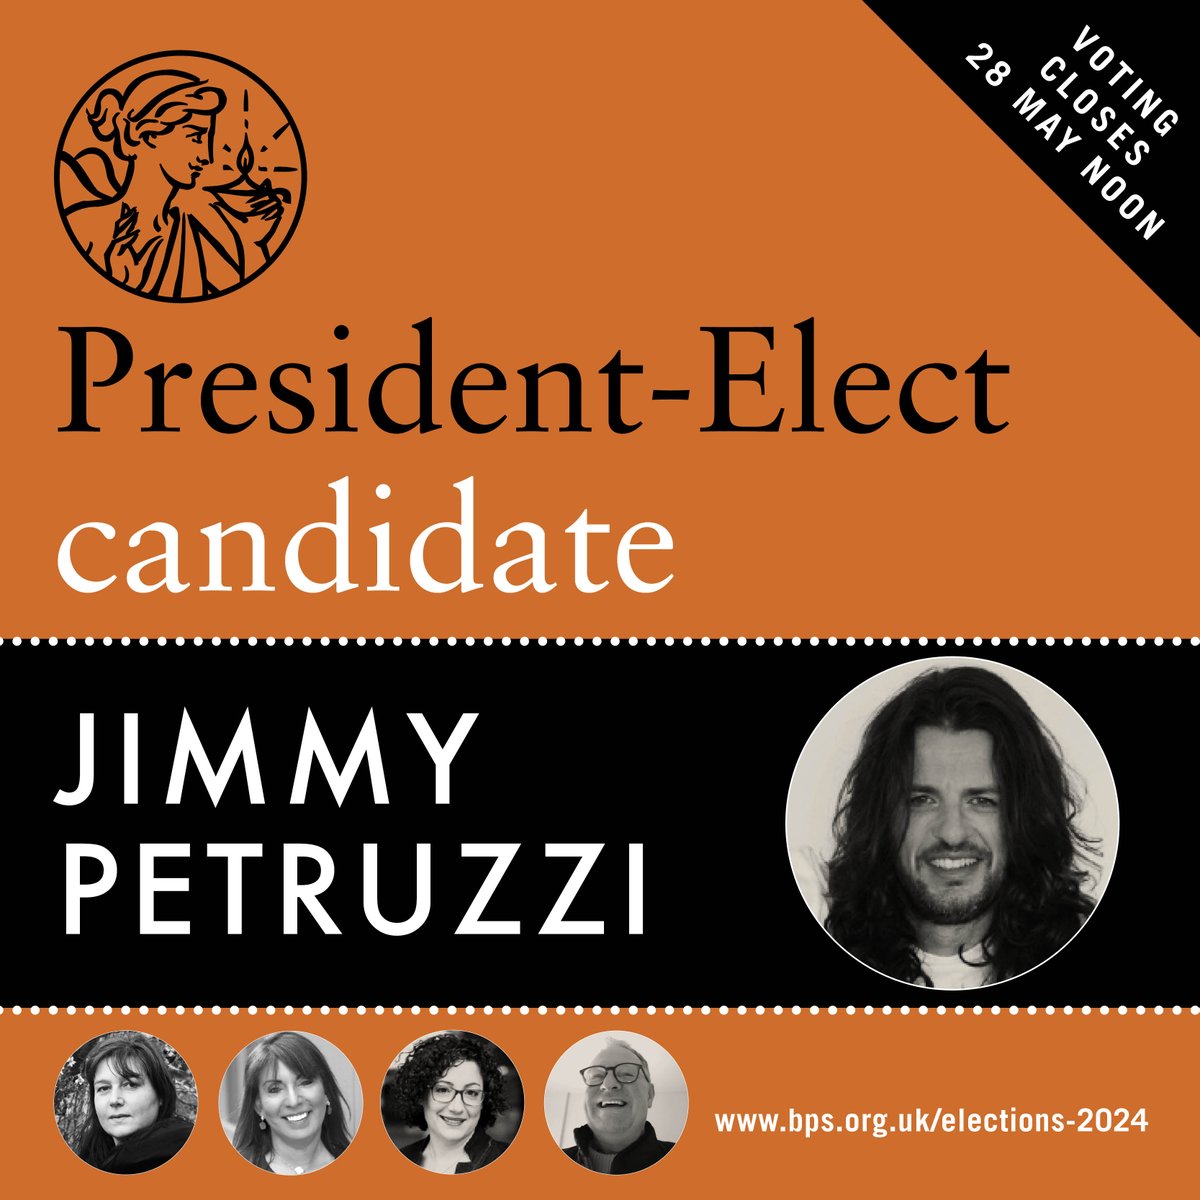 Meet President-Elect candidate, Jimmy Petruzzi, one of five candidates standing for the role of President-Elect this year. Members can now vote for their preferred candidate for the roles of both President-Elect and Elected-Trustee. Meet Jimmy: bps.org.uk/meet-candidate…